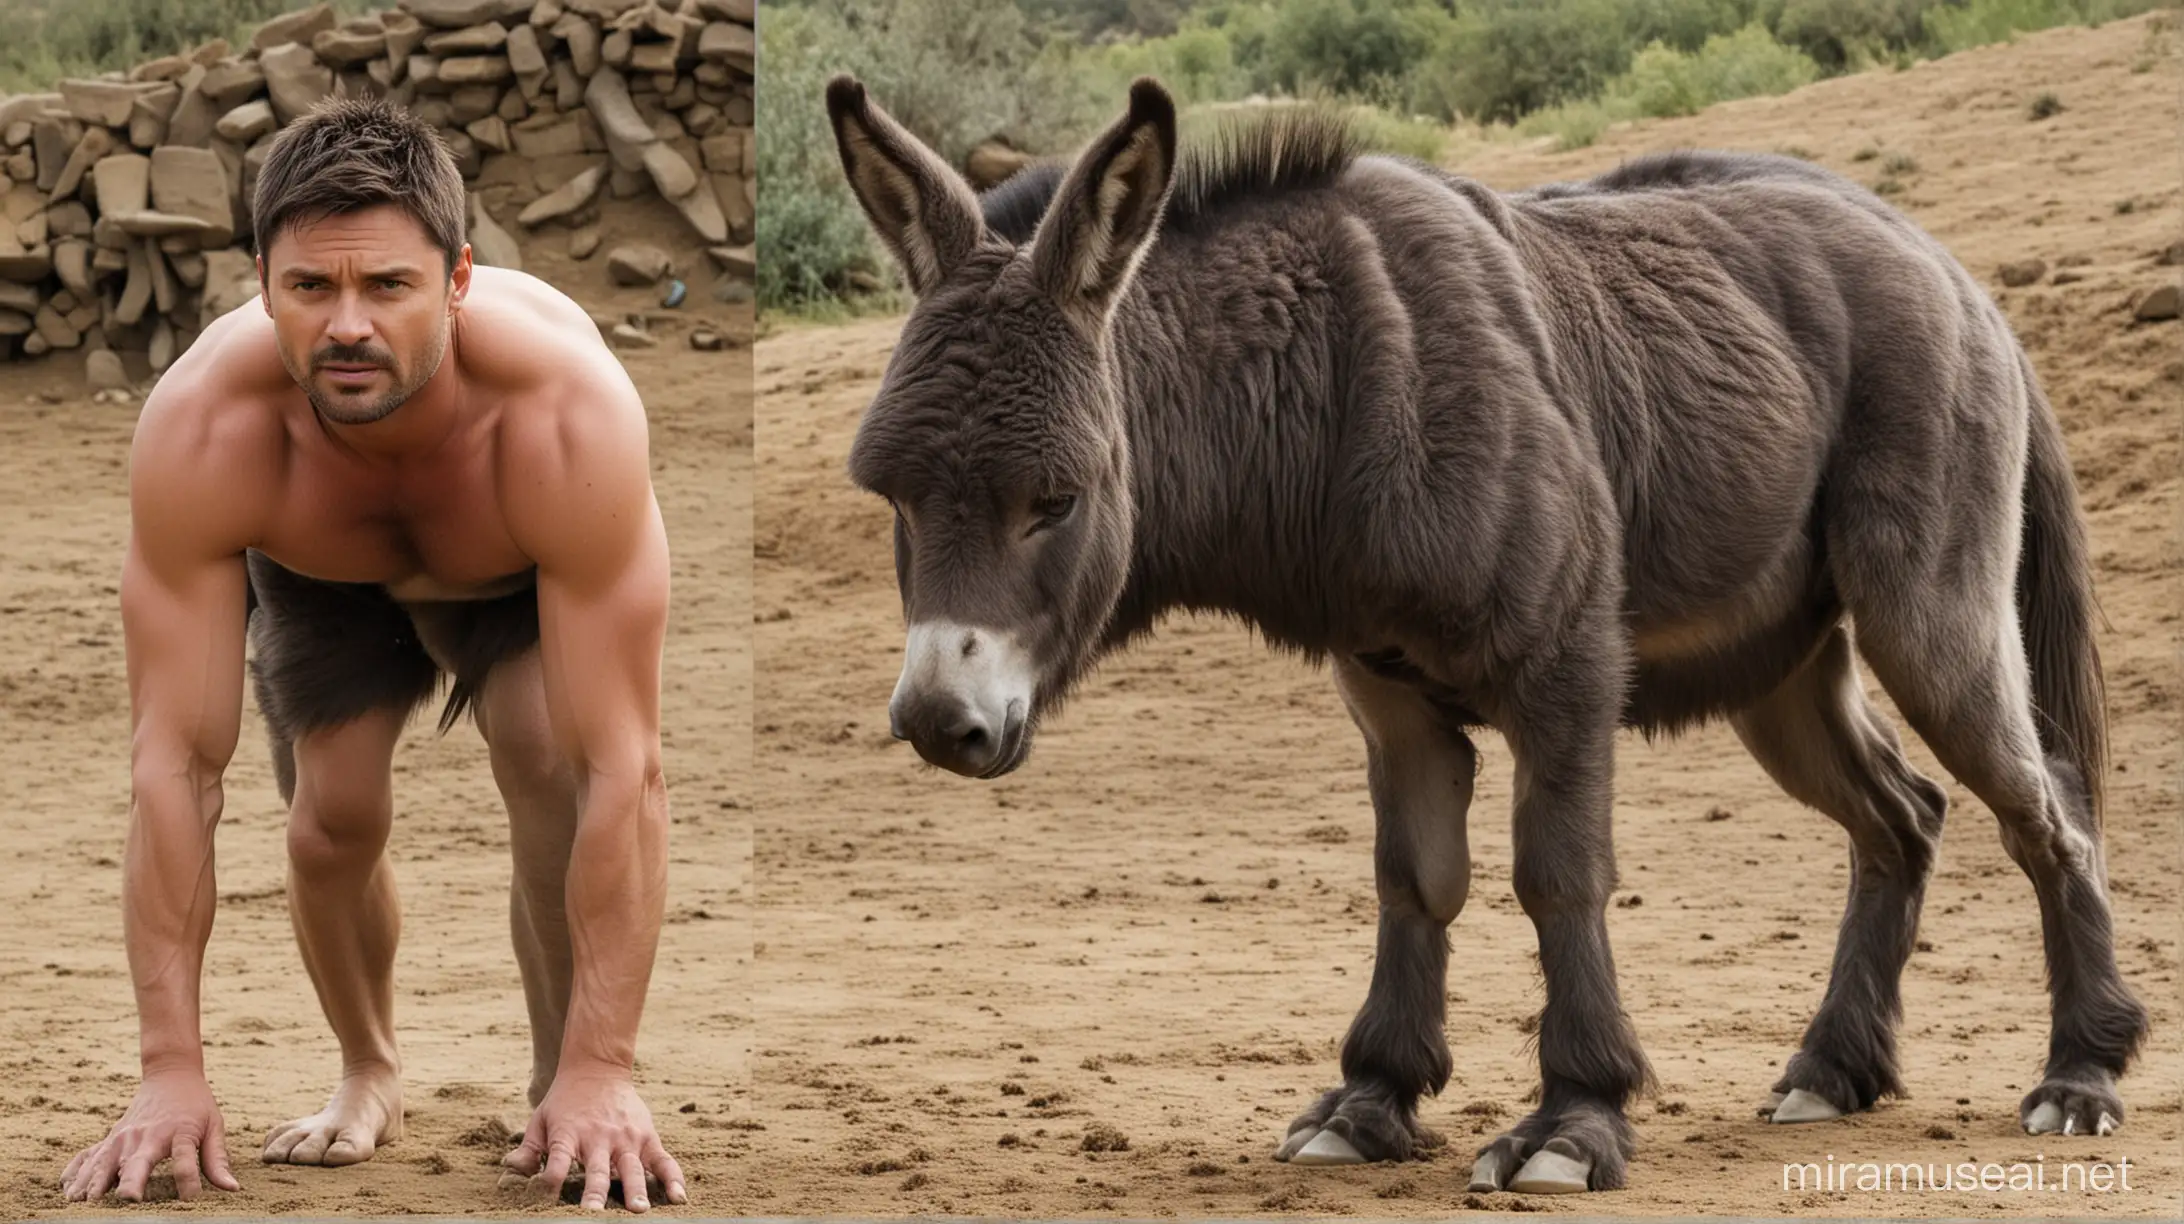 Actor Karl Urban Transforming into Donkey with Human Head